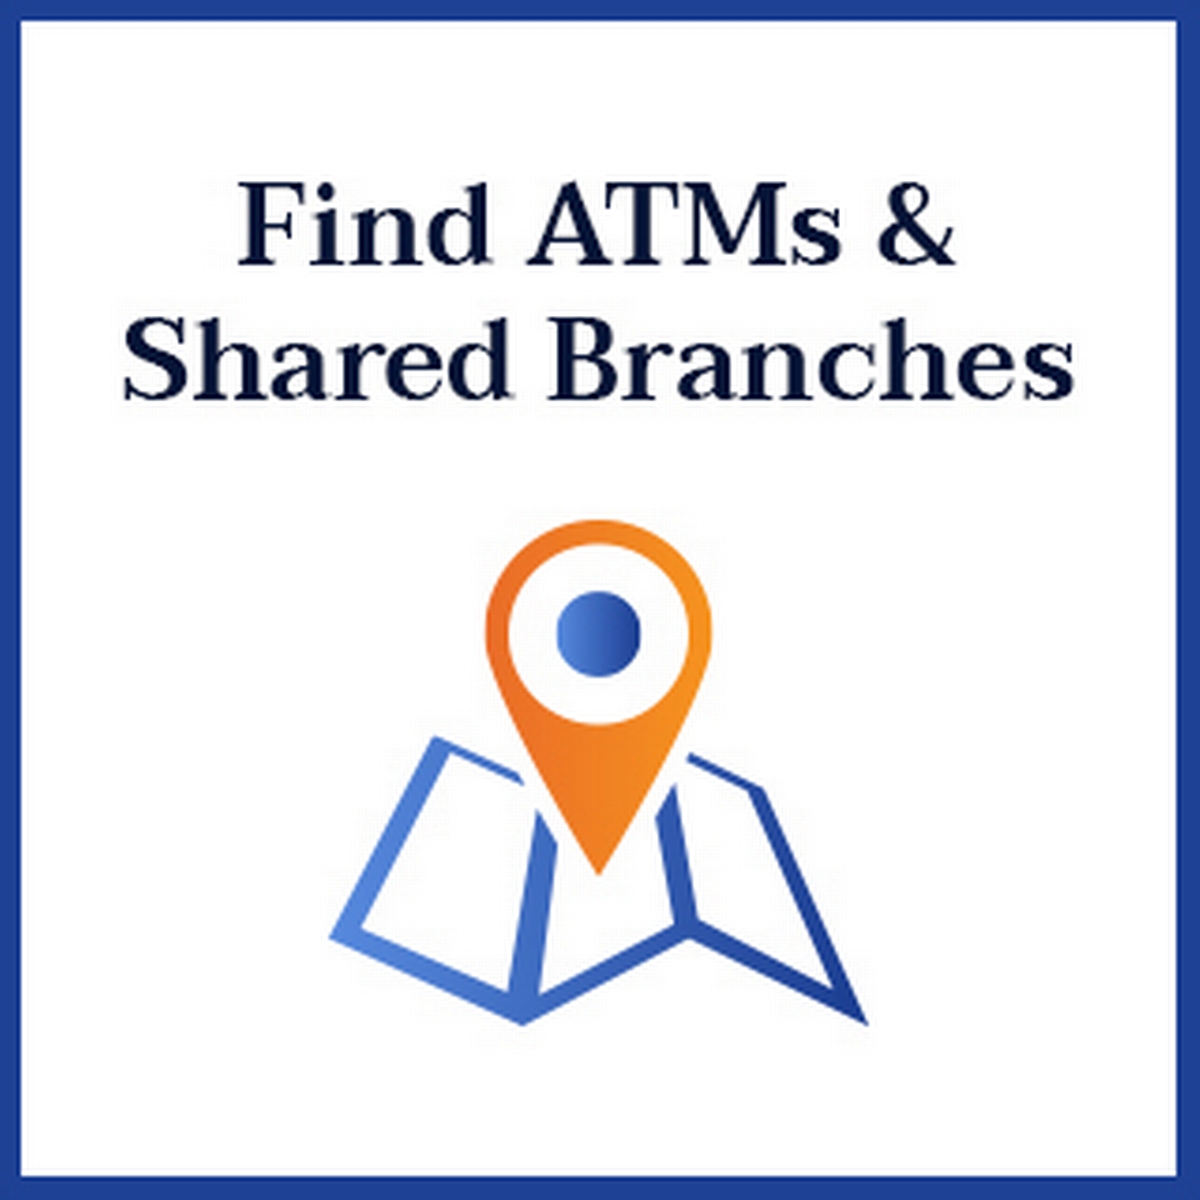 Find ATMs and Shared Branches